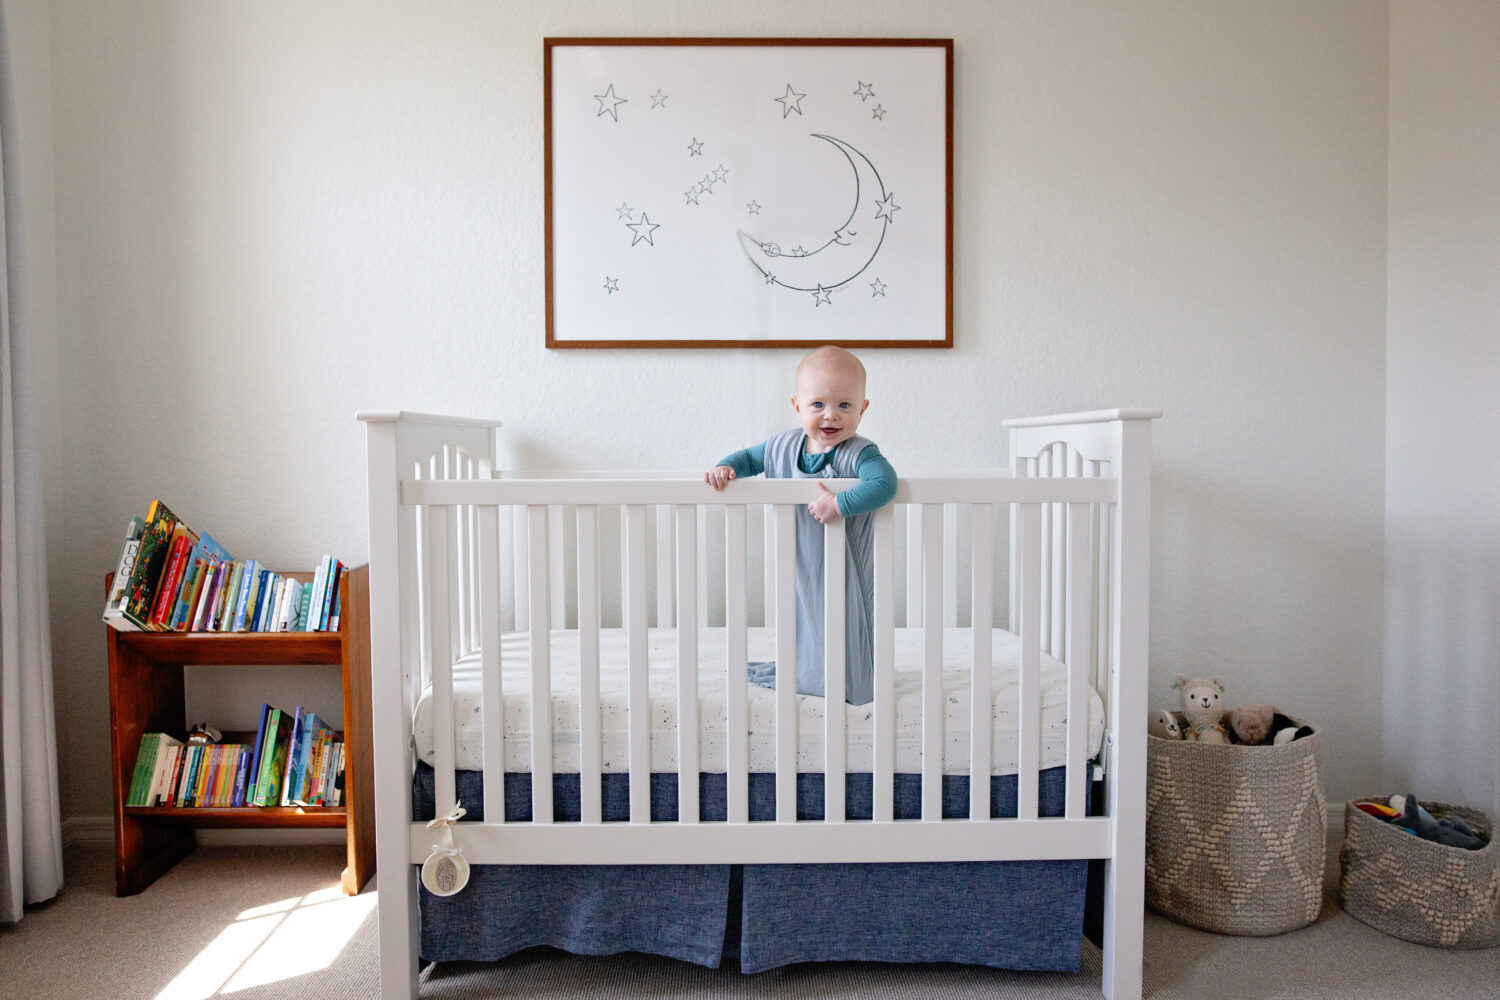 Laughing baby boy standing up in crib